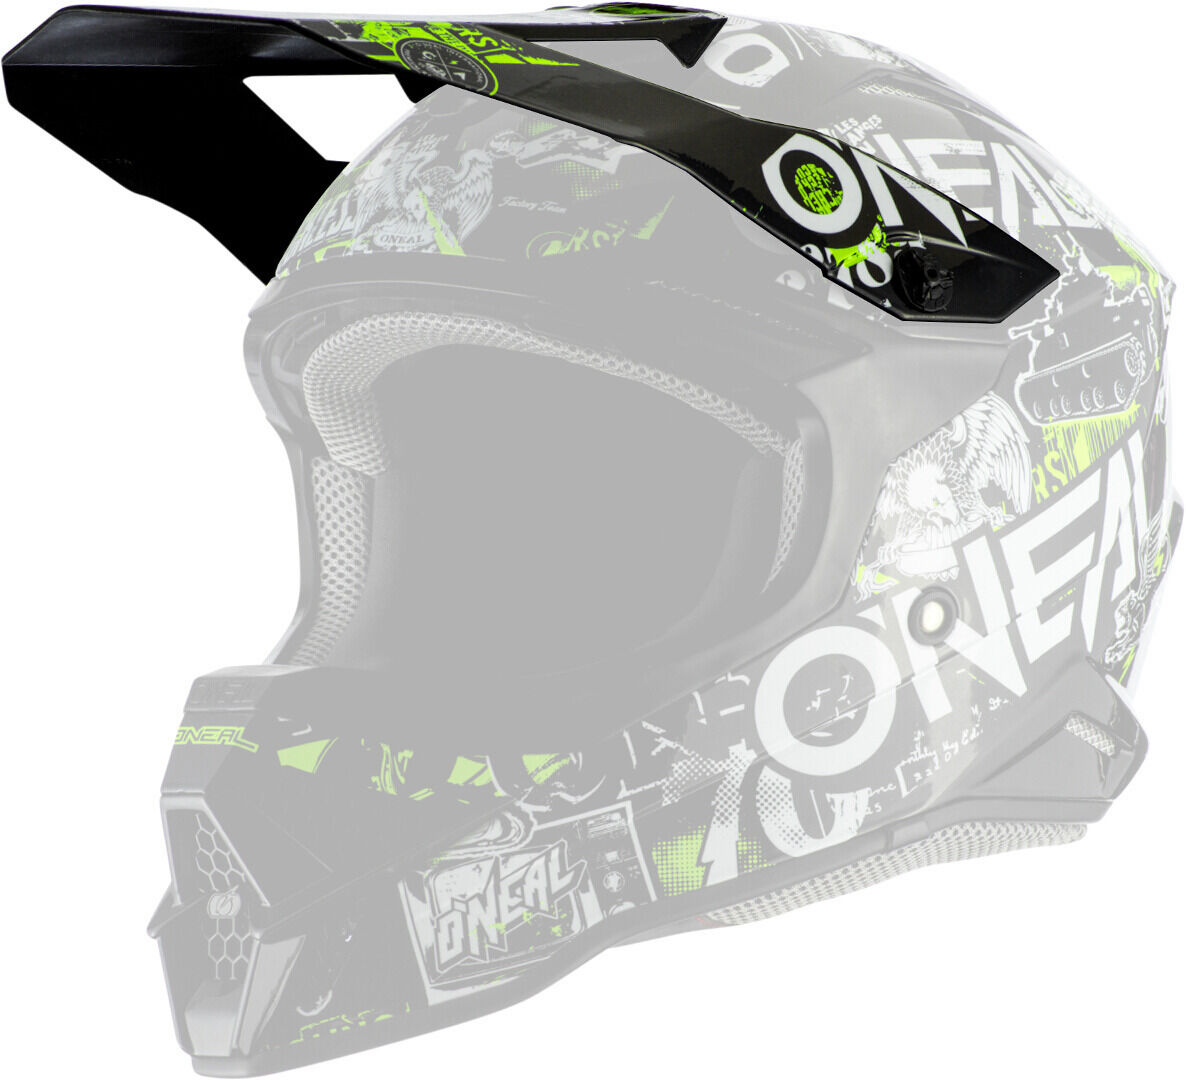 Oneal 3Series Attack 2.0 Pico do Capacete